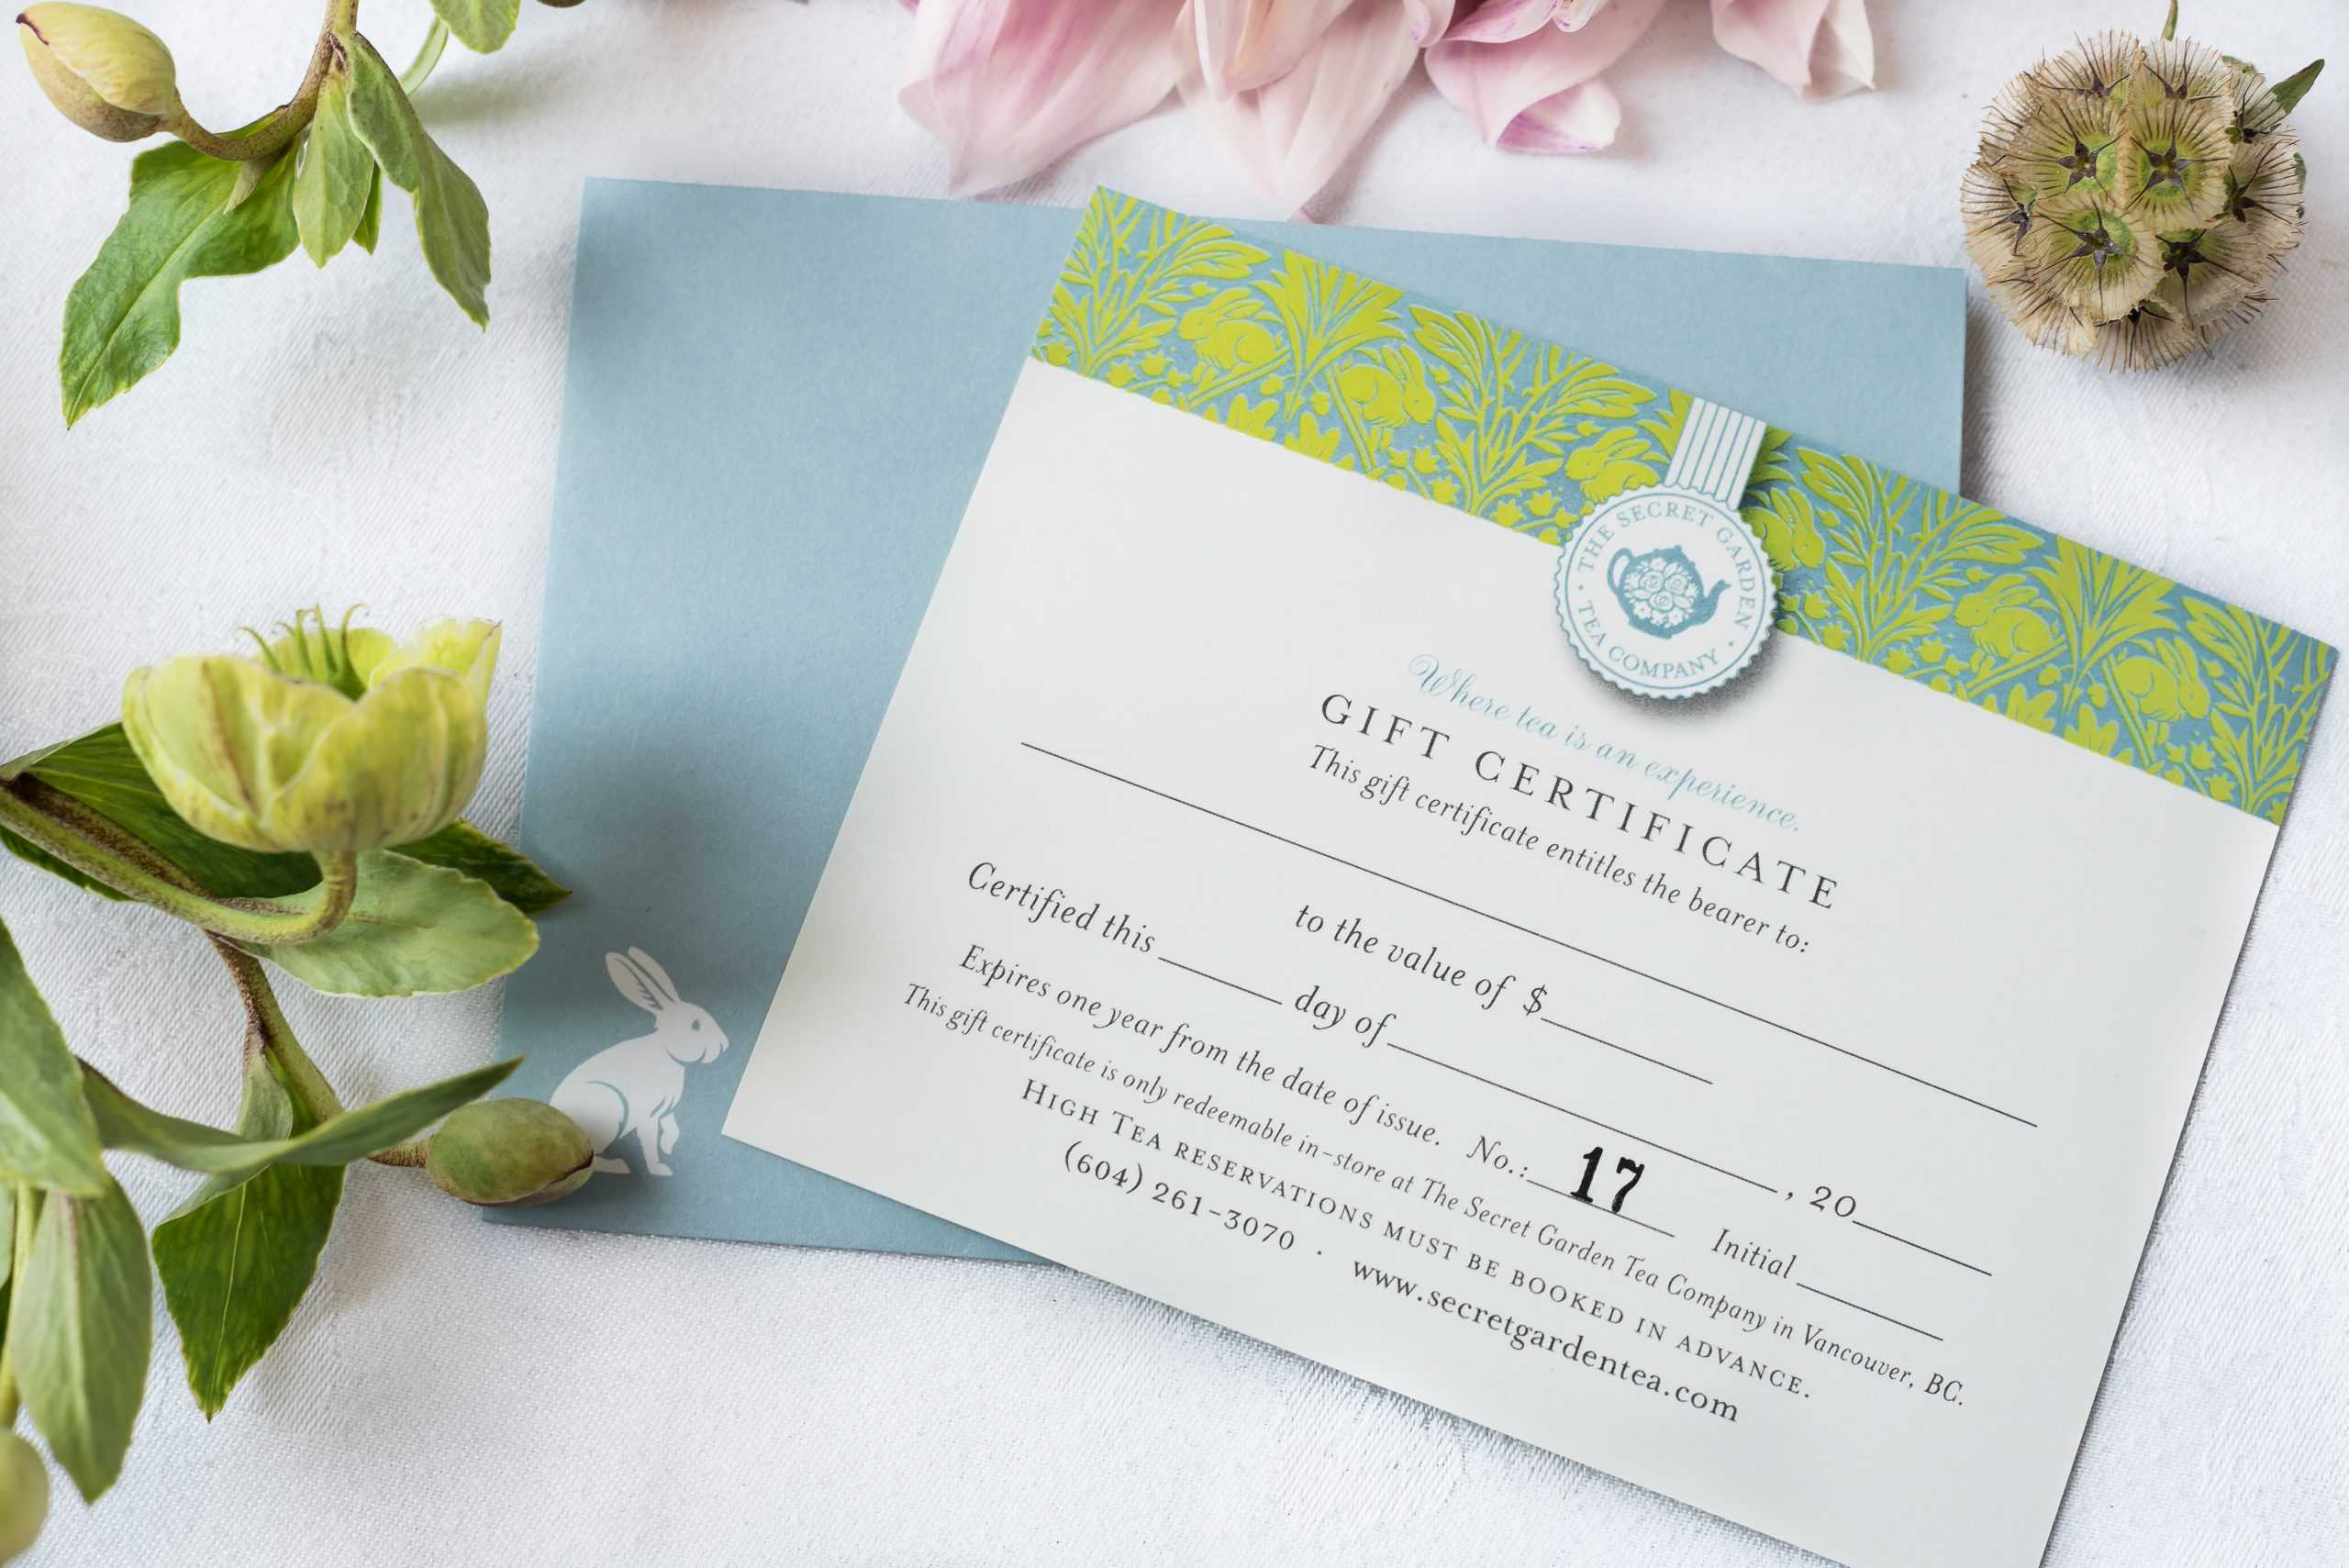 Gift Certificate (For In Store Use Only) With Regard To This Entitles The Bearer To Template Certificate